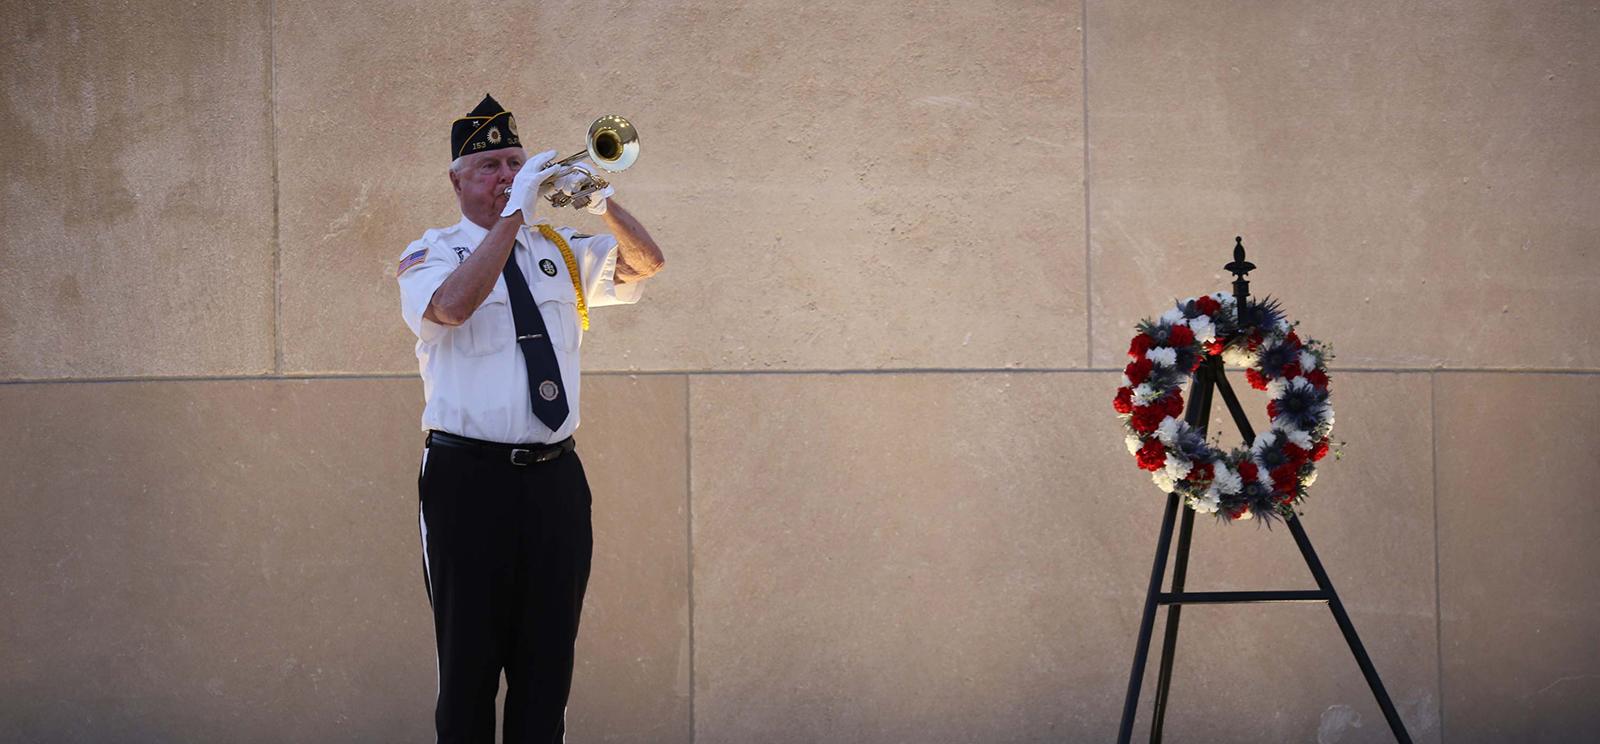 A uniformed bugler a playing Taps at the base of the Tower with a floral wreath in a stand to his right.